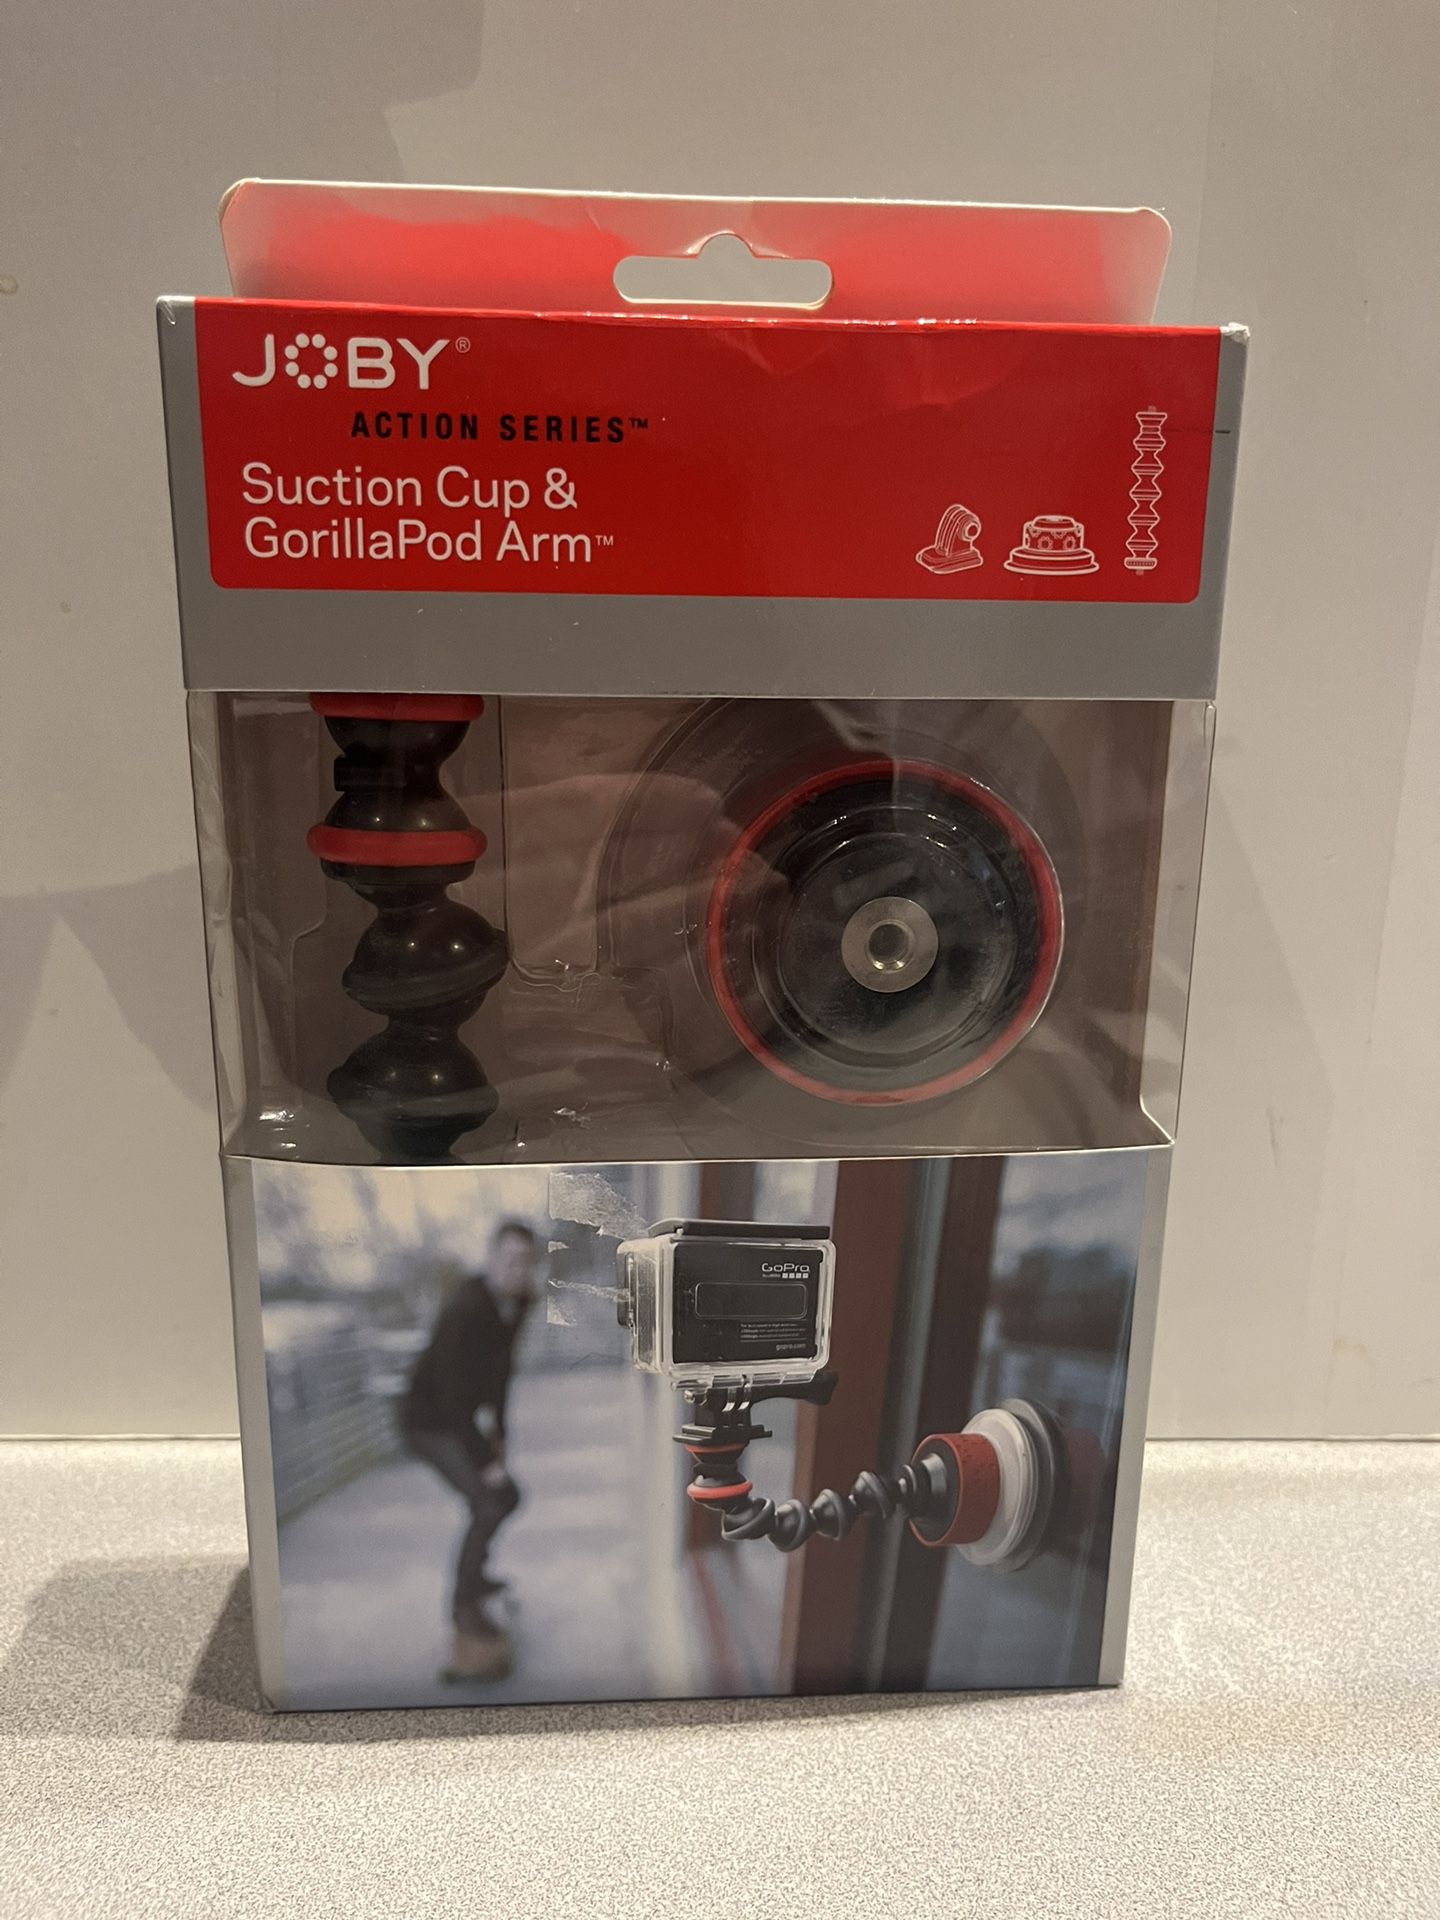 JOBY Action Series Suction cup & Gorilla Arm for GoPro/Action video cameras Excellent condition complete